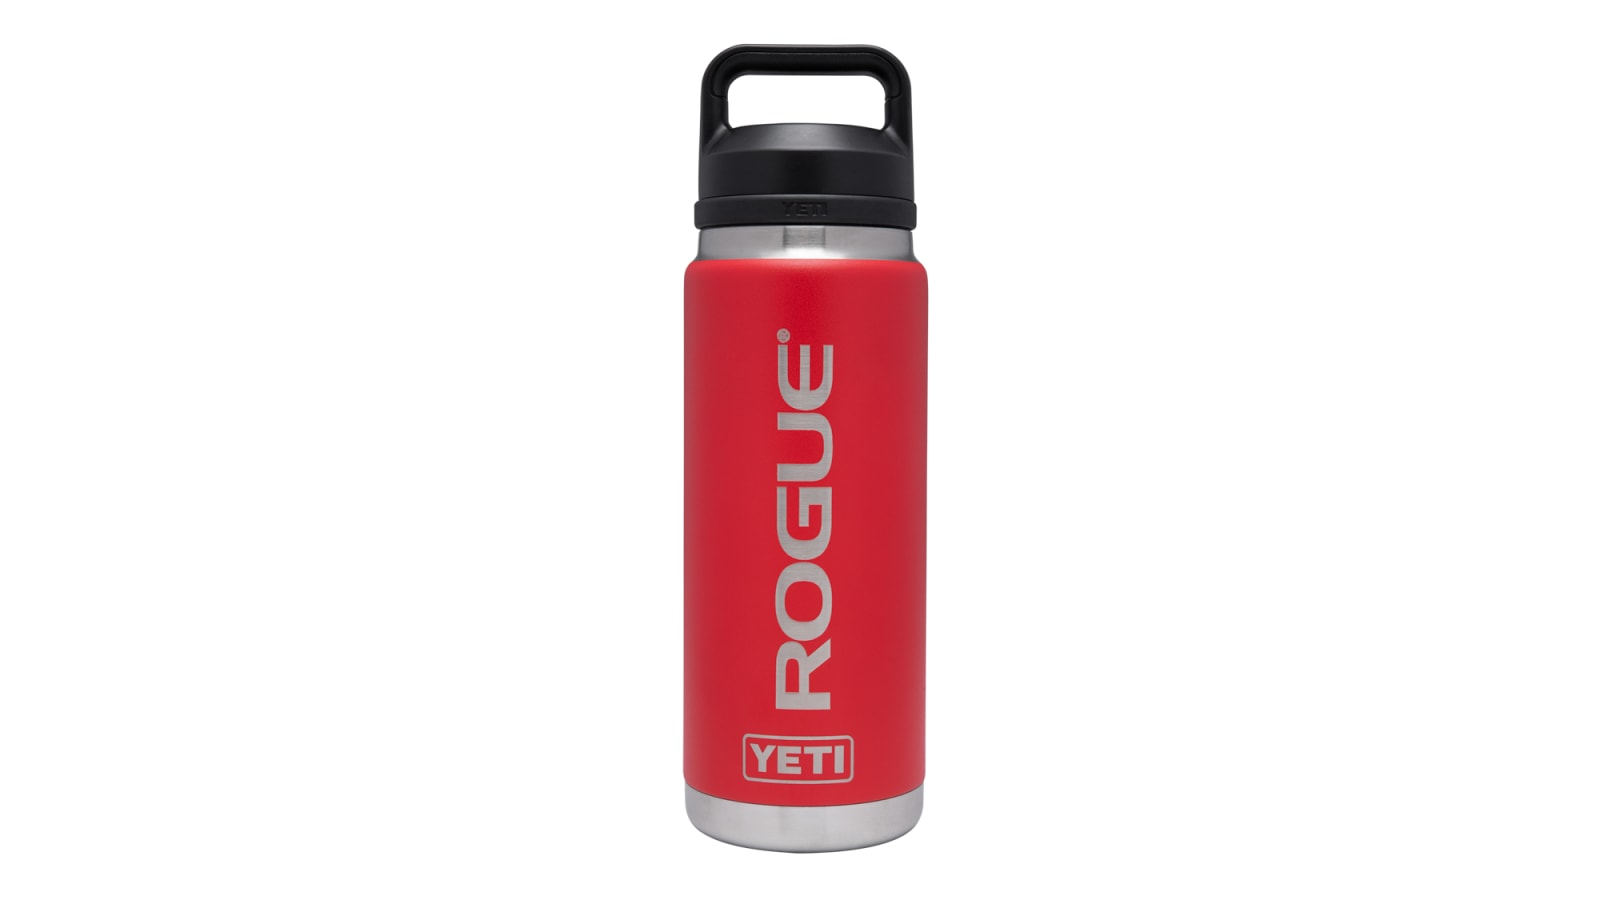 https://assets.roguefitness.com/f_auto,q_auto,c_limit,w_1600,b_rgb:ffffff/catalog/Gear%20and%20Accessories/Accessories/Shakers%20and%20Bottles/YT0099/YT0099-web1_m1ti0y.png